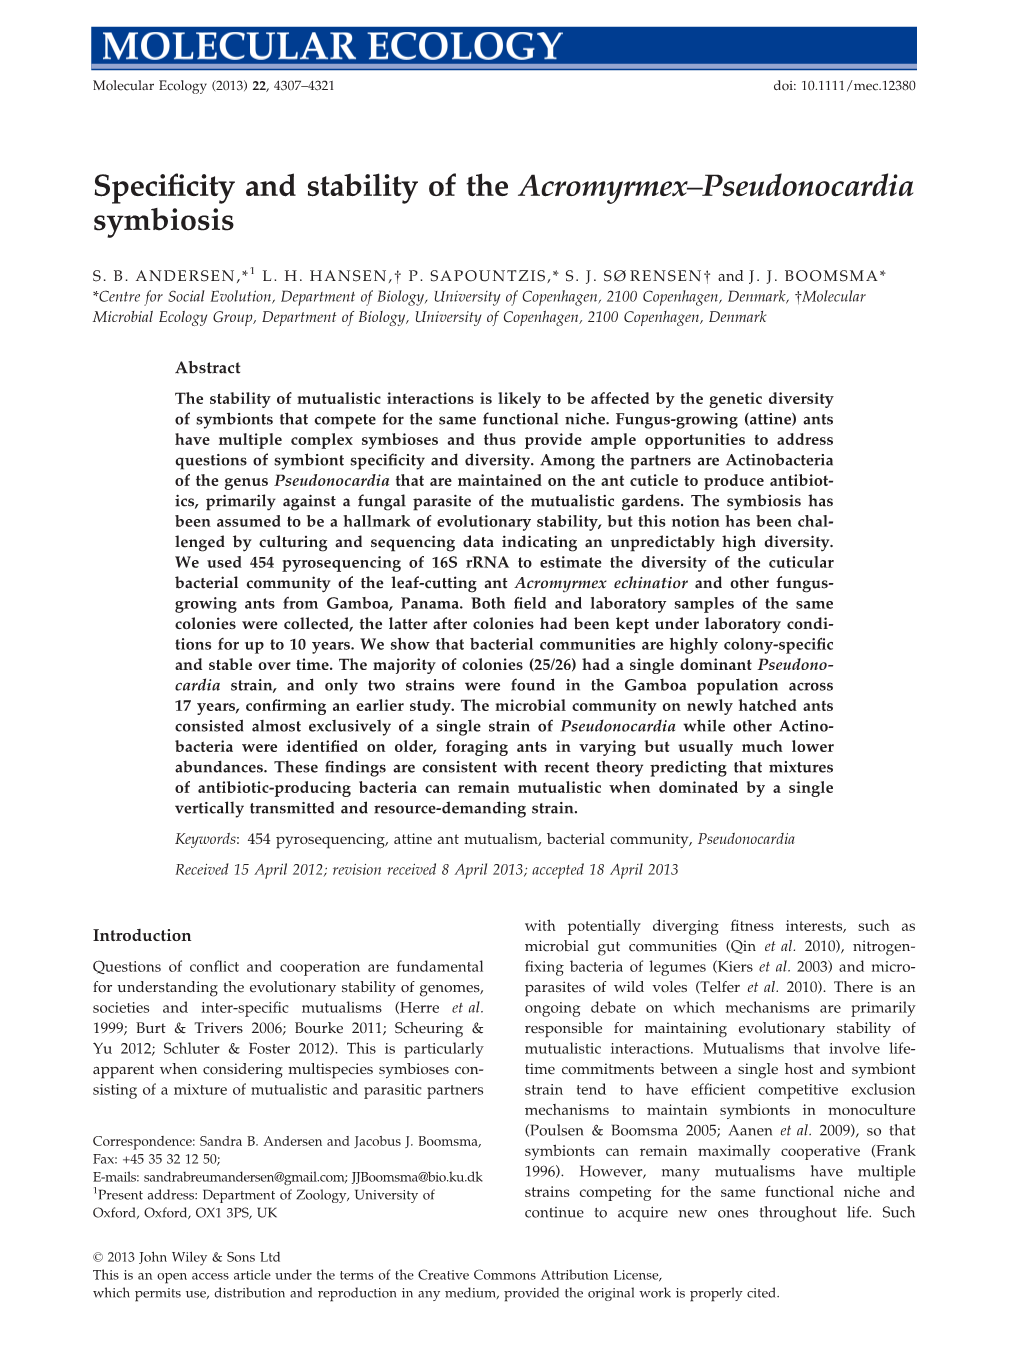 SPECIFICITY and STABILITY of the ACROMYRMEX–PSEUDONOCARDIA SYMBIOSIS 4309 Ria That They Would Not Associate with in the ﬁeld, Partic- the Pronotum of A